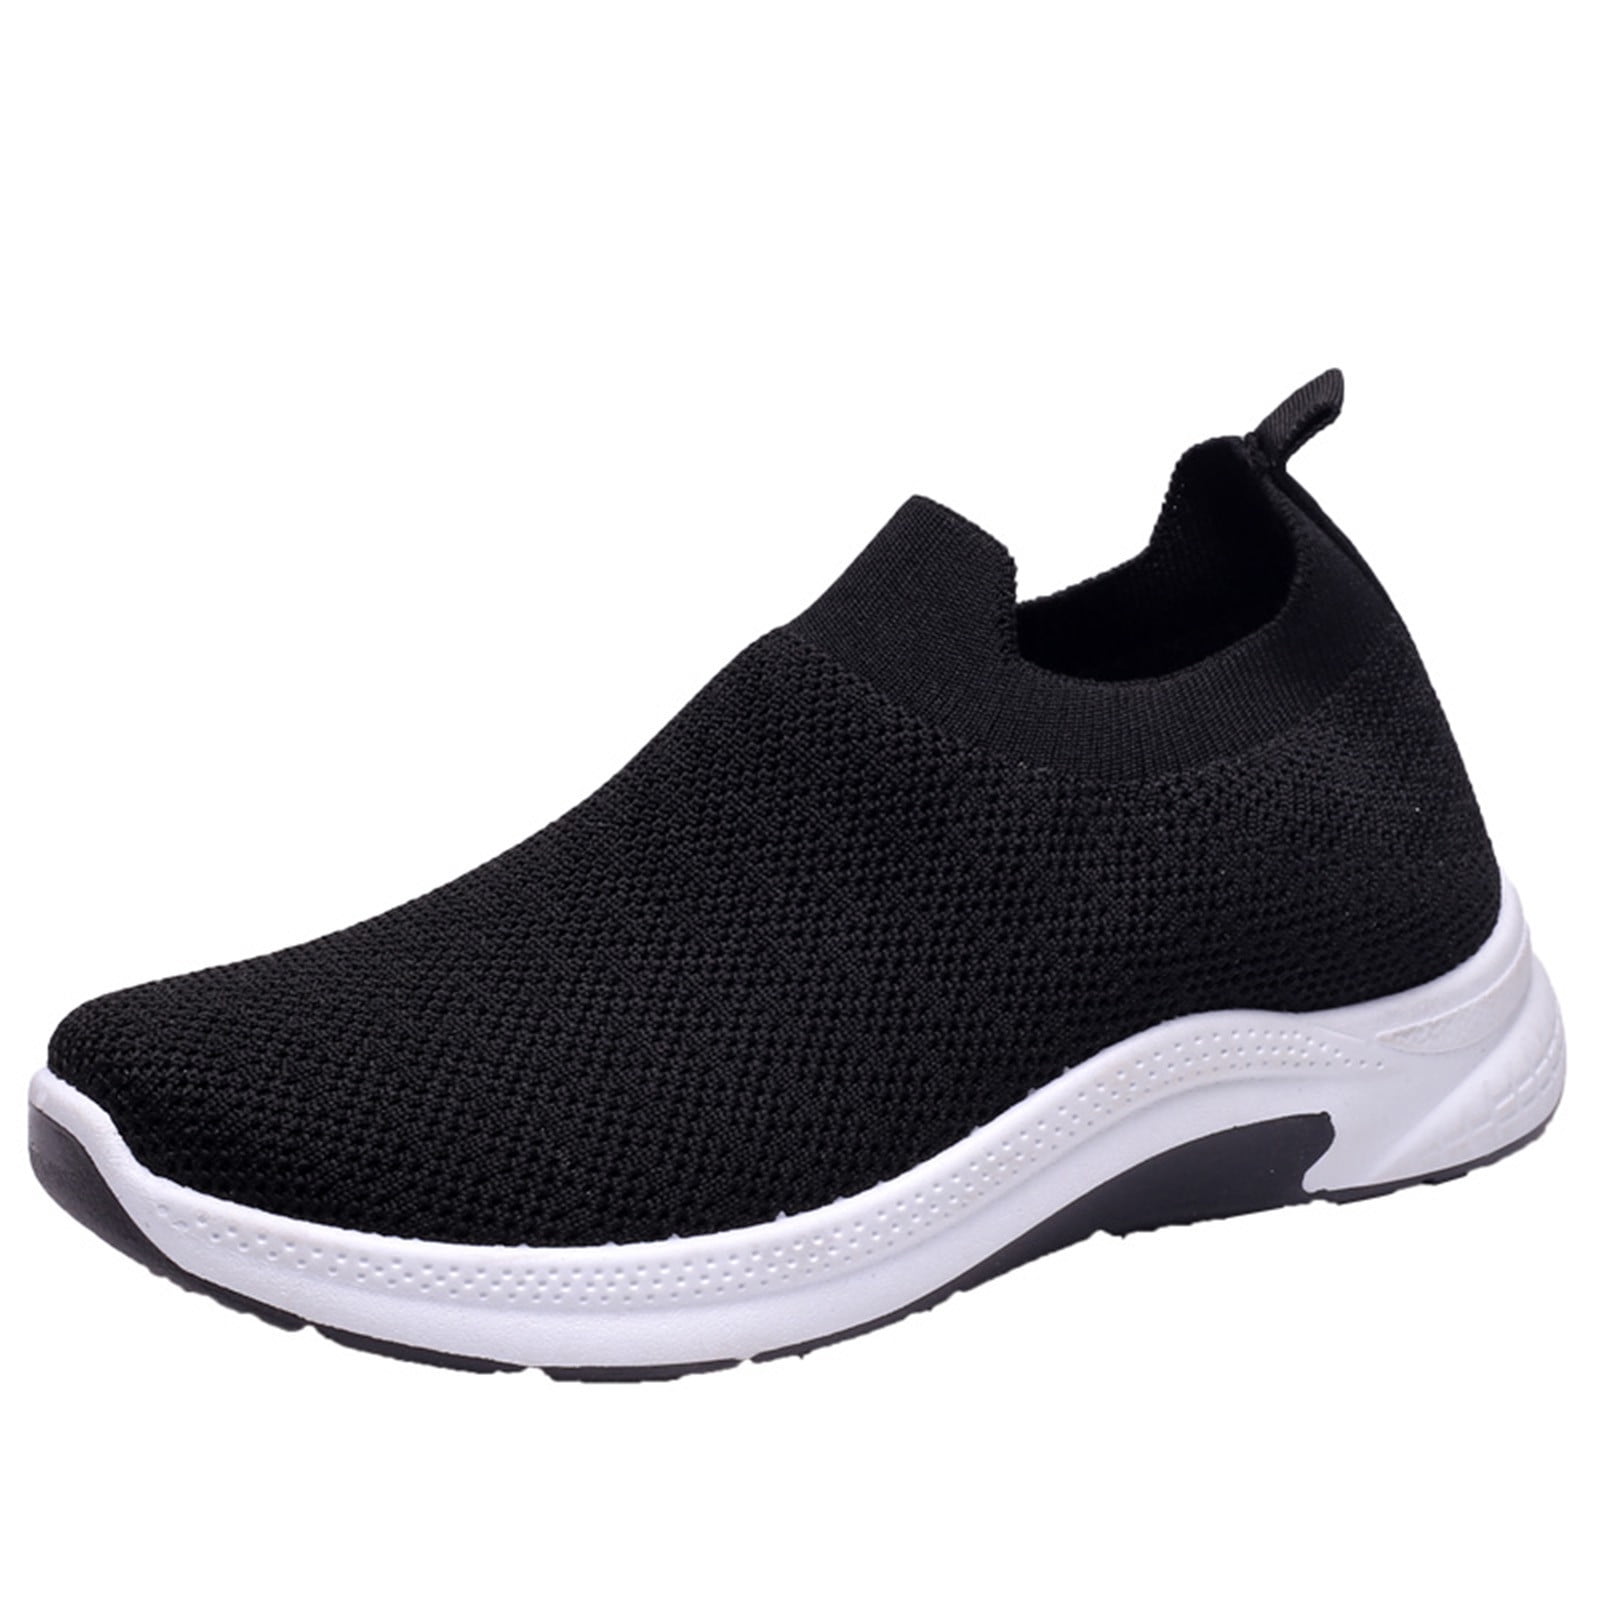 Womens Running Shoes Blade Tennis Walking Sneakers Comfortable Fashion Non Slip Work Sport Athletic Shoes 